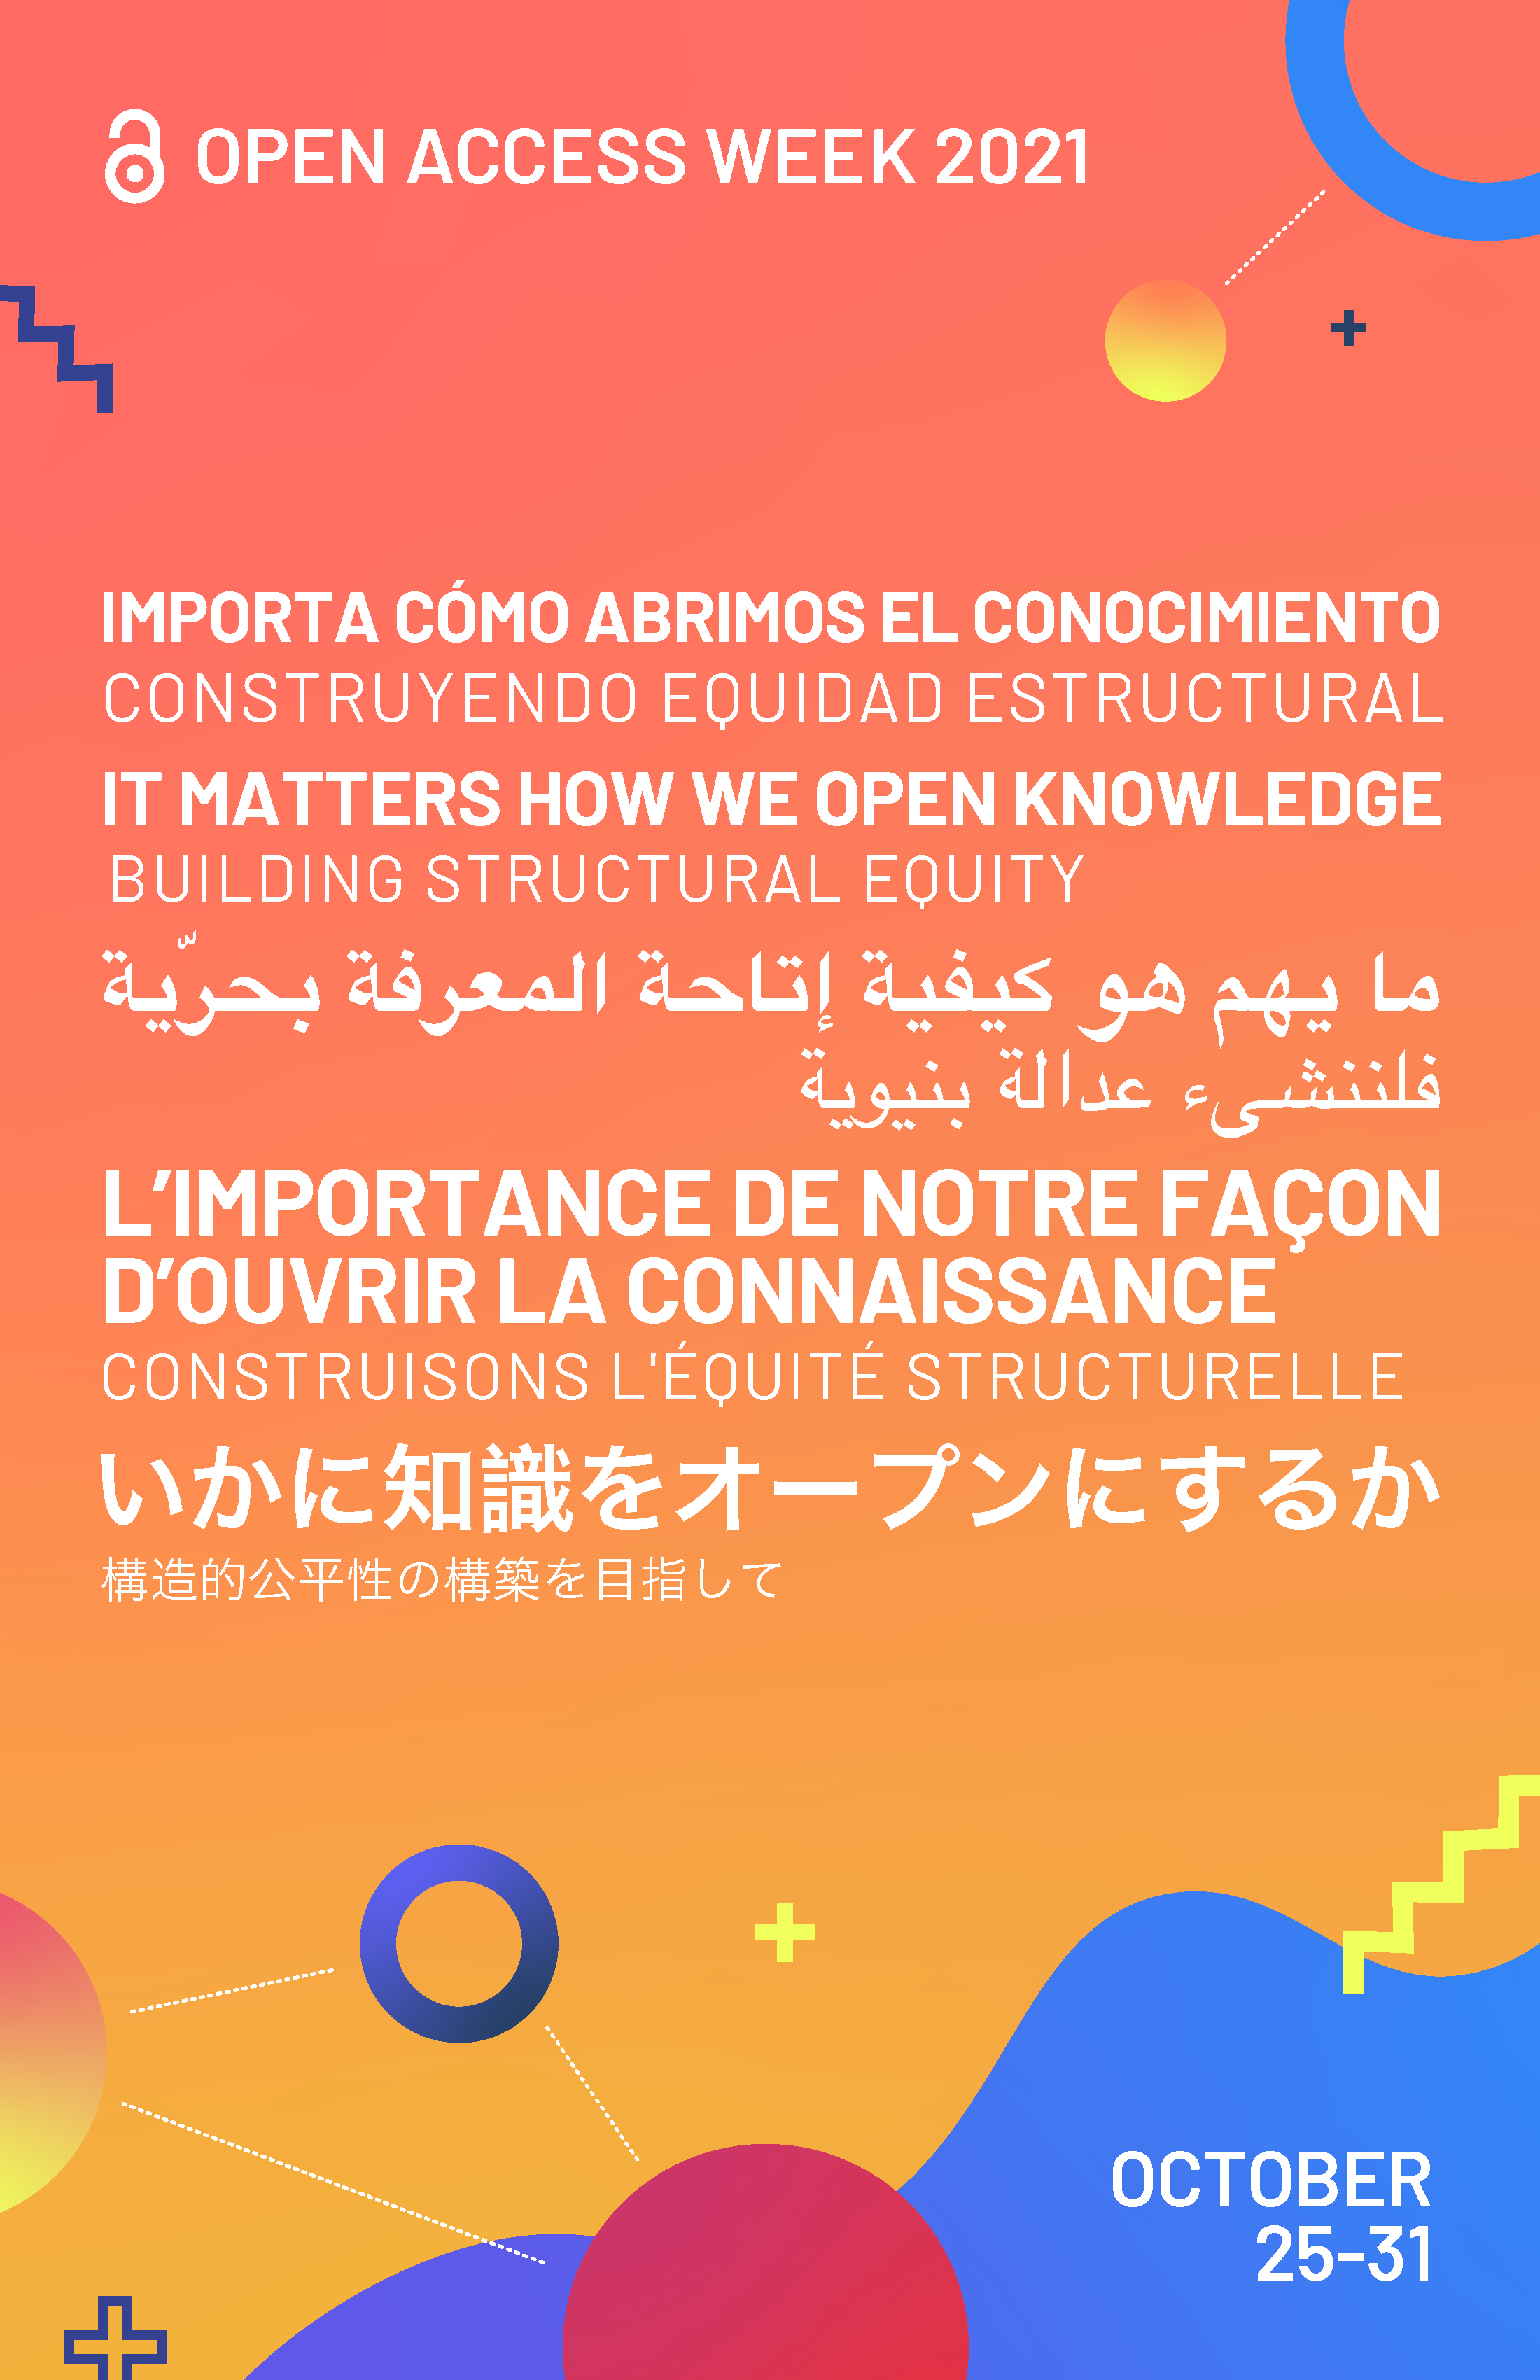 The quote "It matters how we open knowledge", in various languages